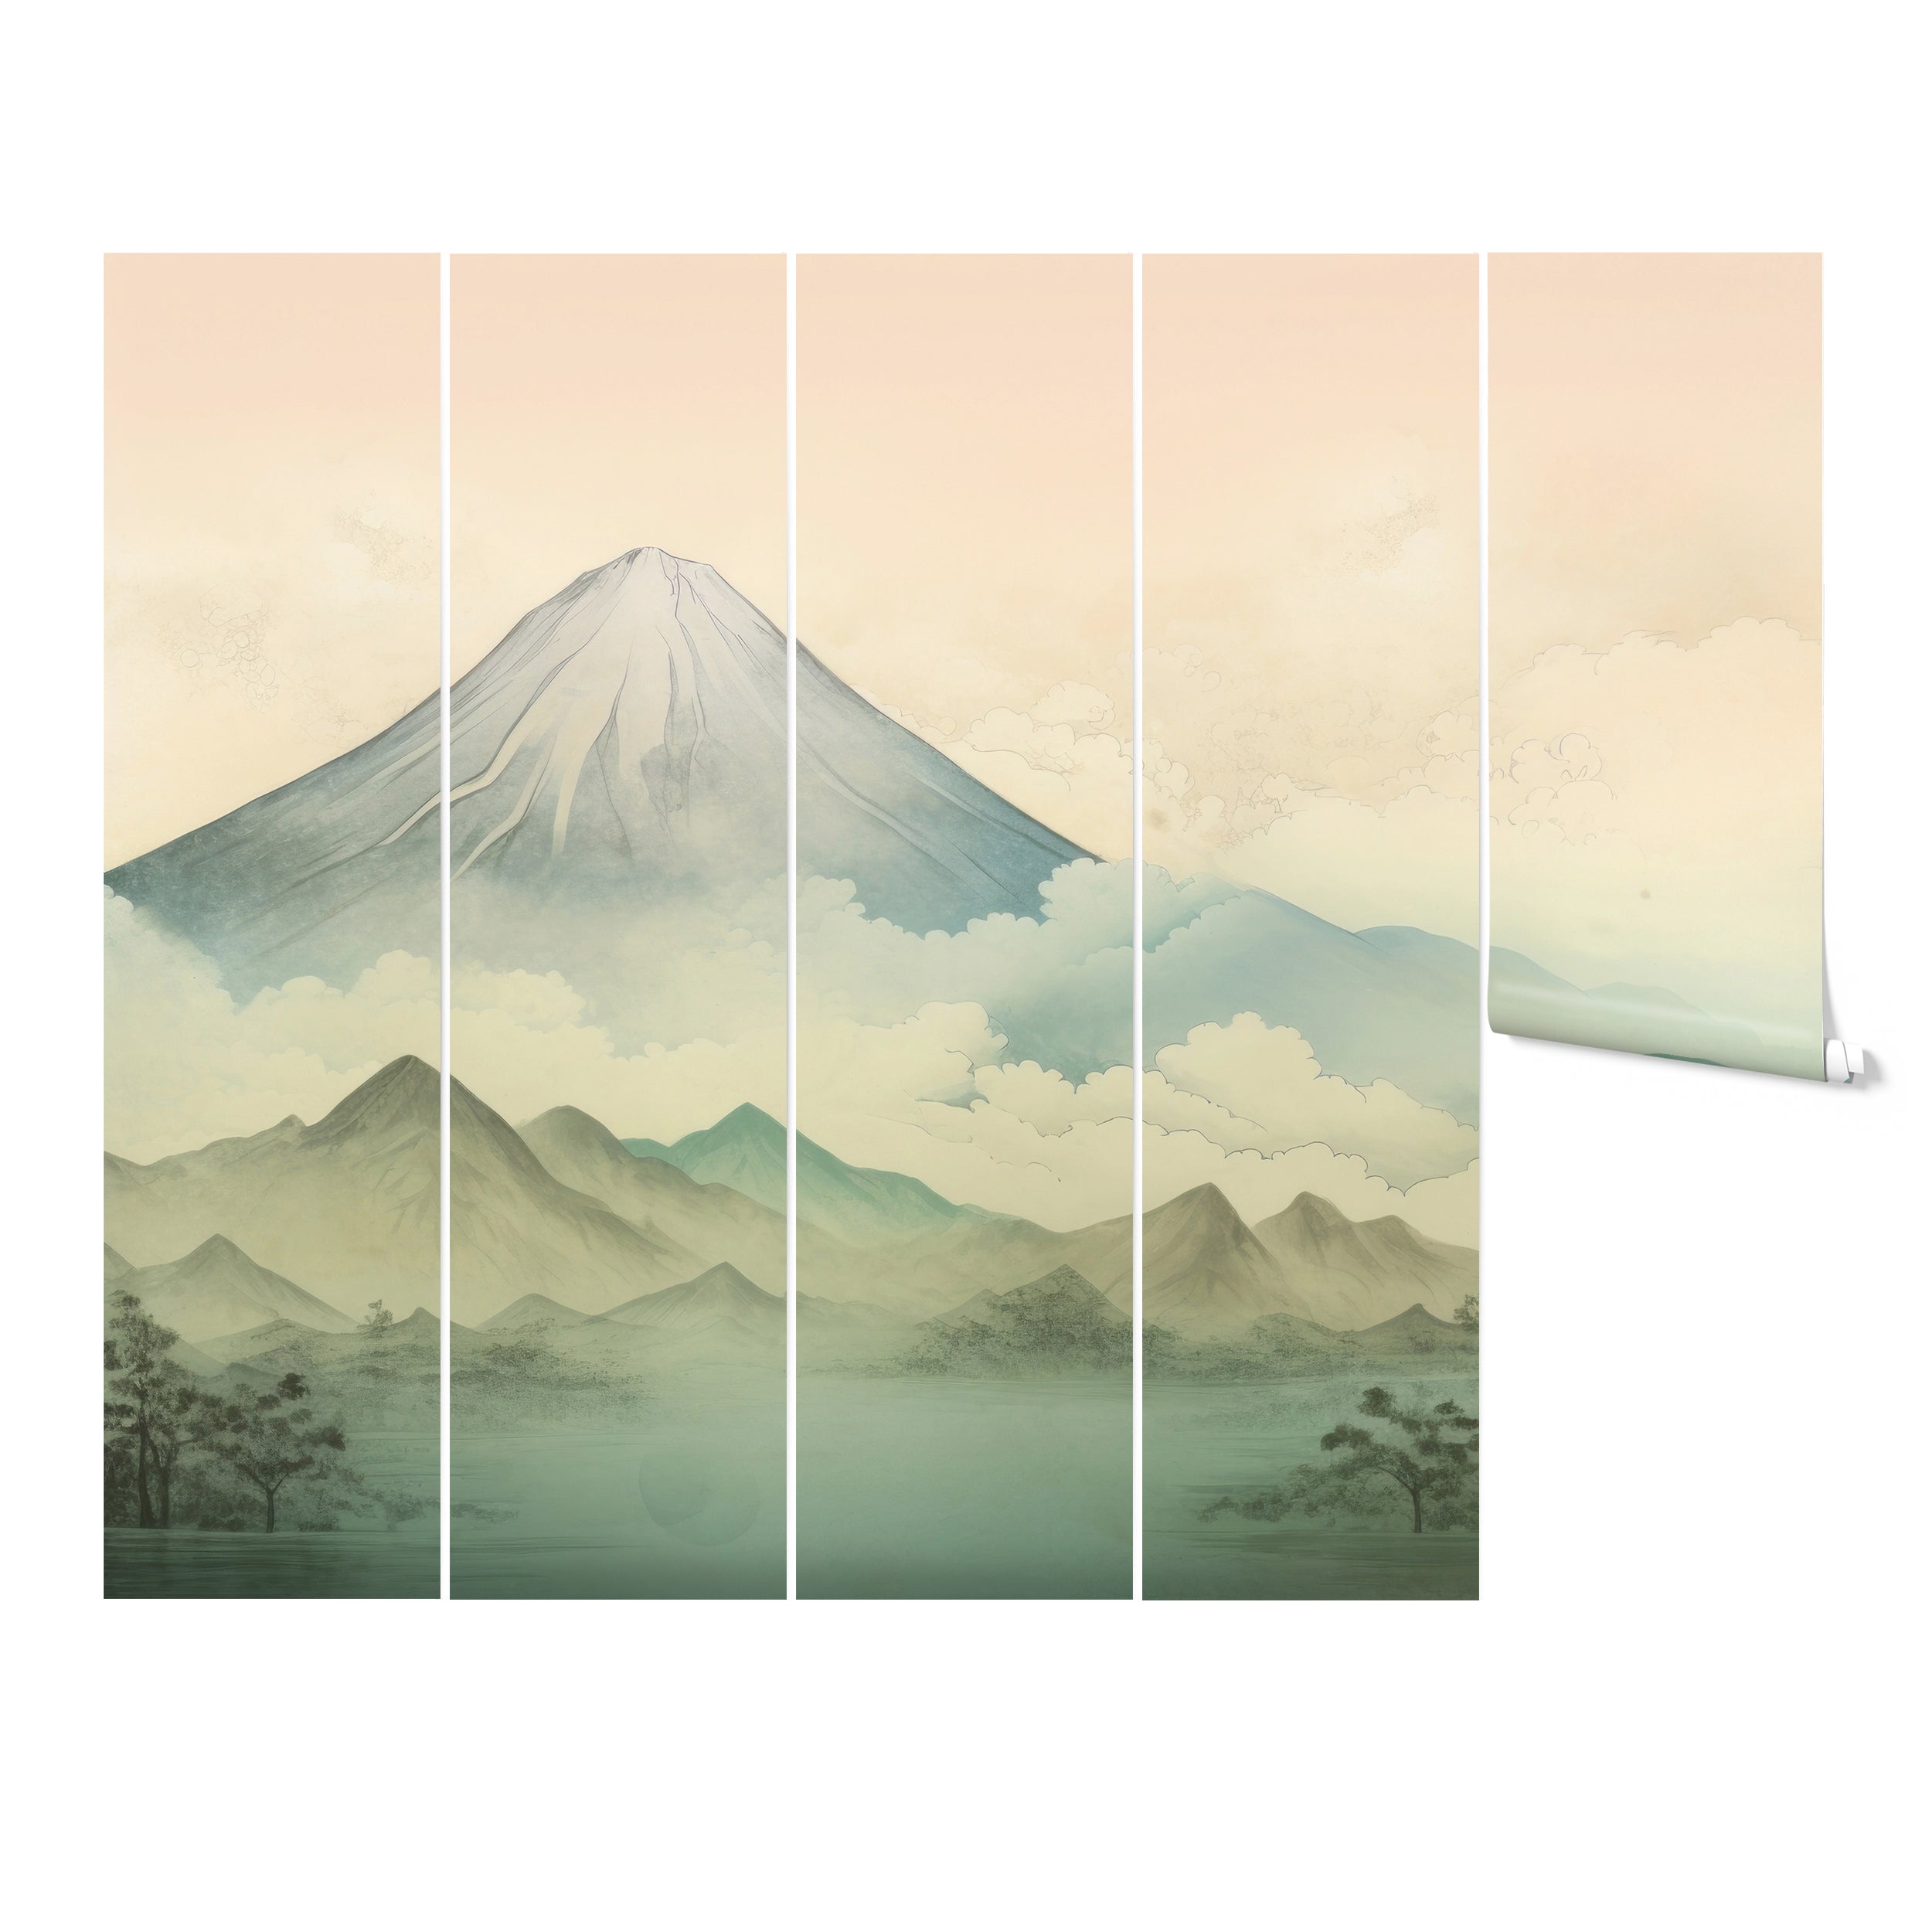 Above the Clouds mural featuring a majestic mountain peak emerging above soft, pastel-colored clouds with subtle details of trees in the foreground.